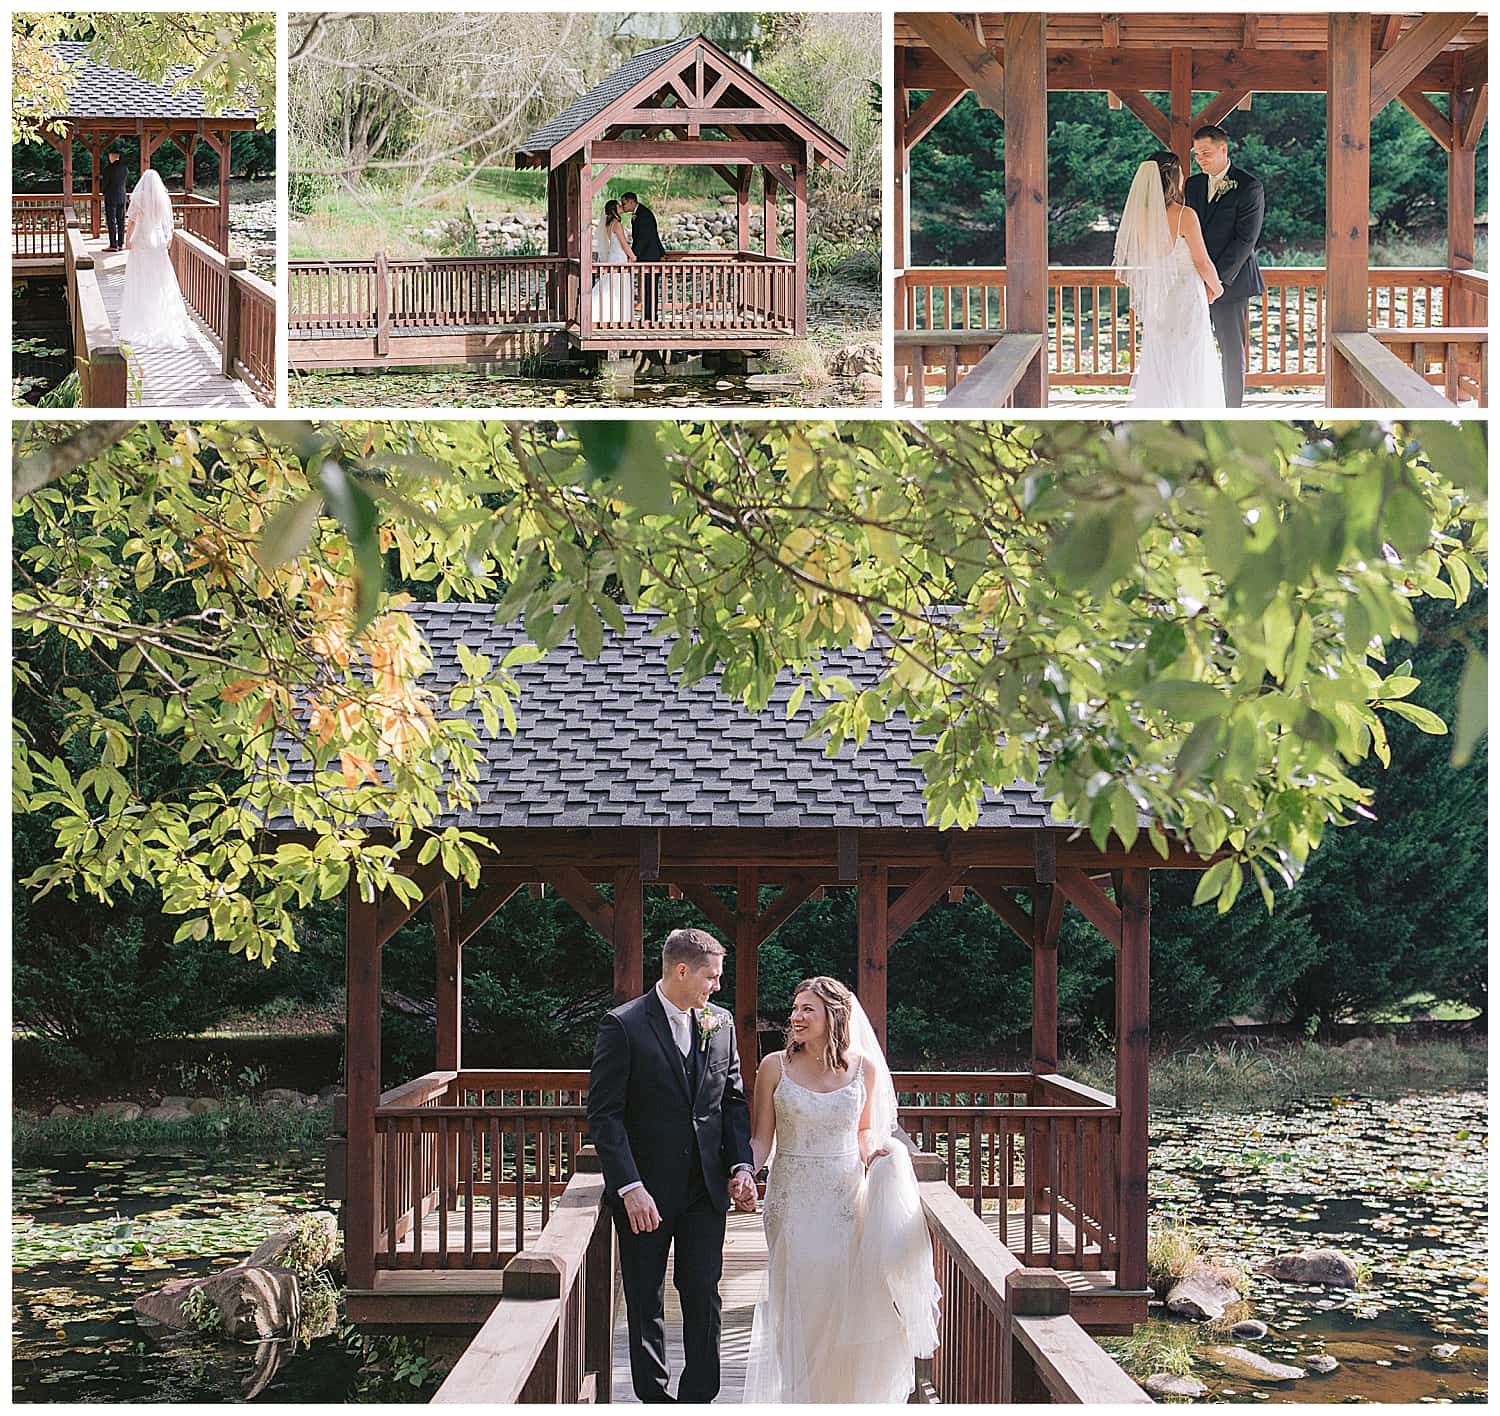 Photo collage of bride and groom sharing their first look on their wedding day on a wooden gazebo dock set amongst a pond and plenty of green lily ads